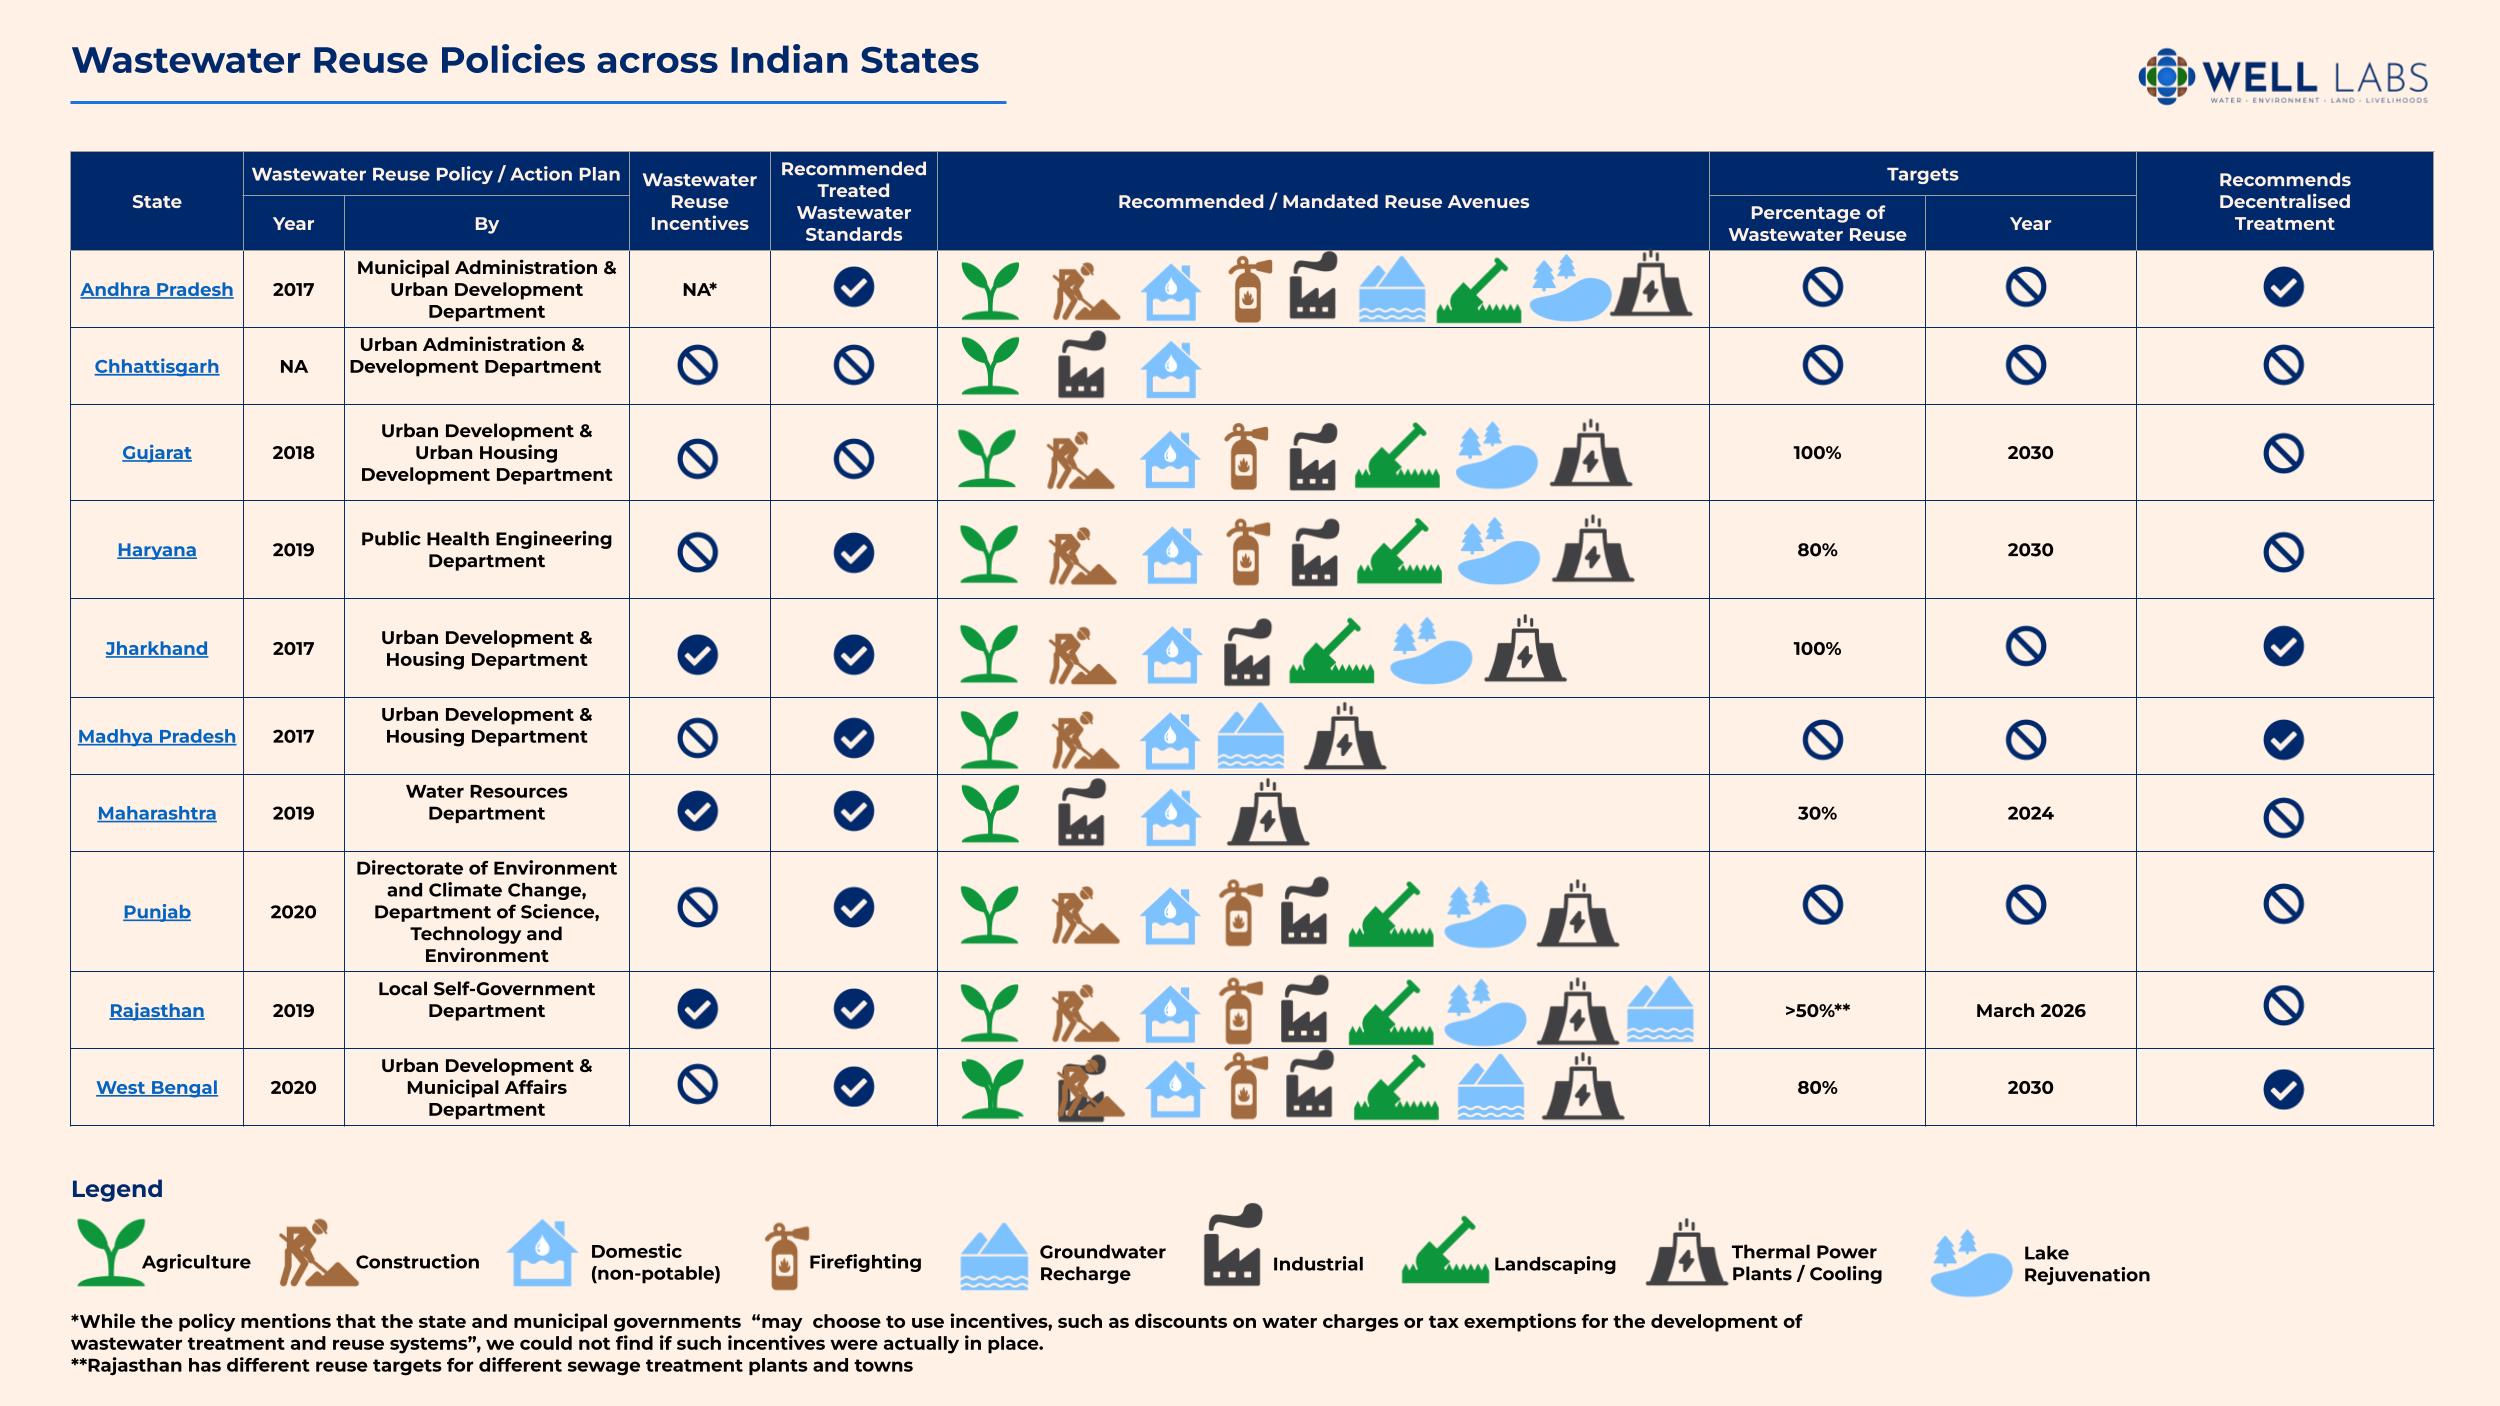 This table shows wastewater reuse policies across Indian states. To access the PDF version, click on "Download Infographic" below.